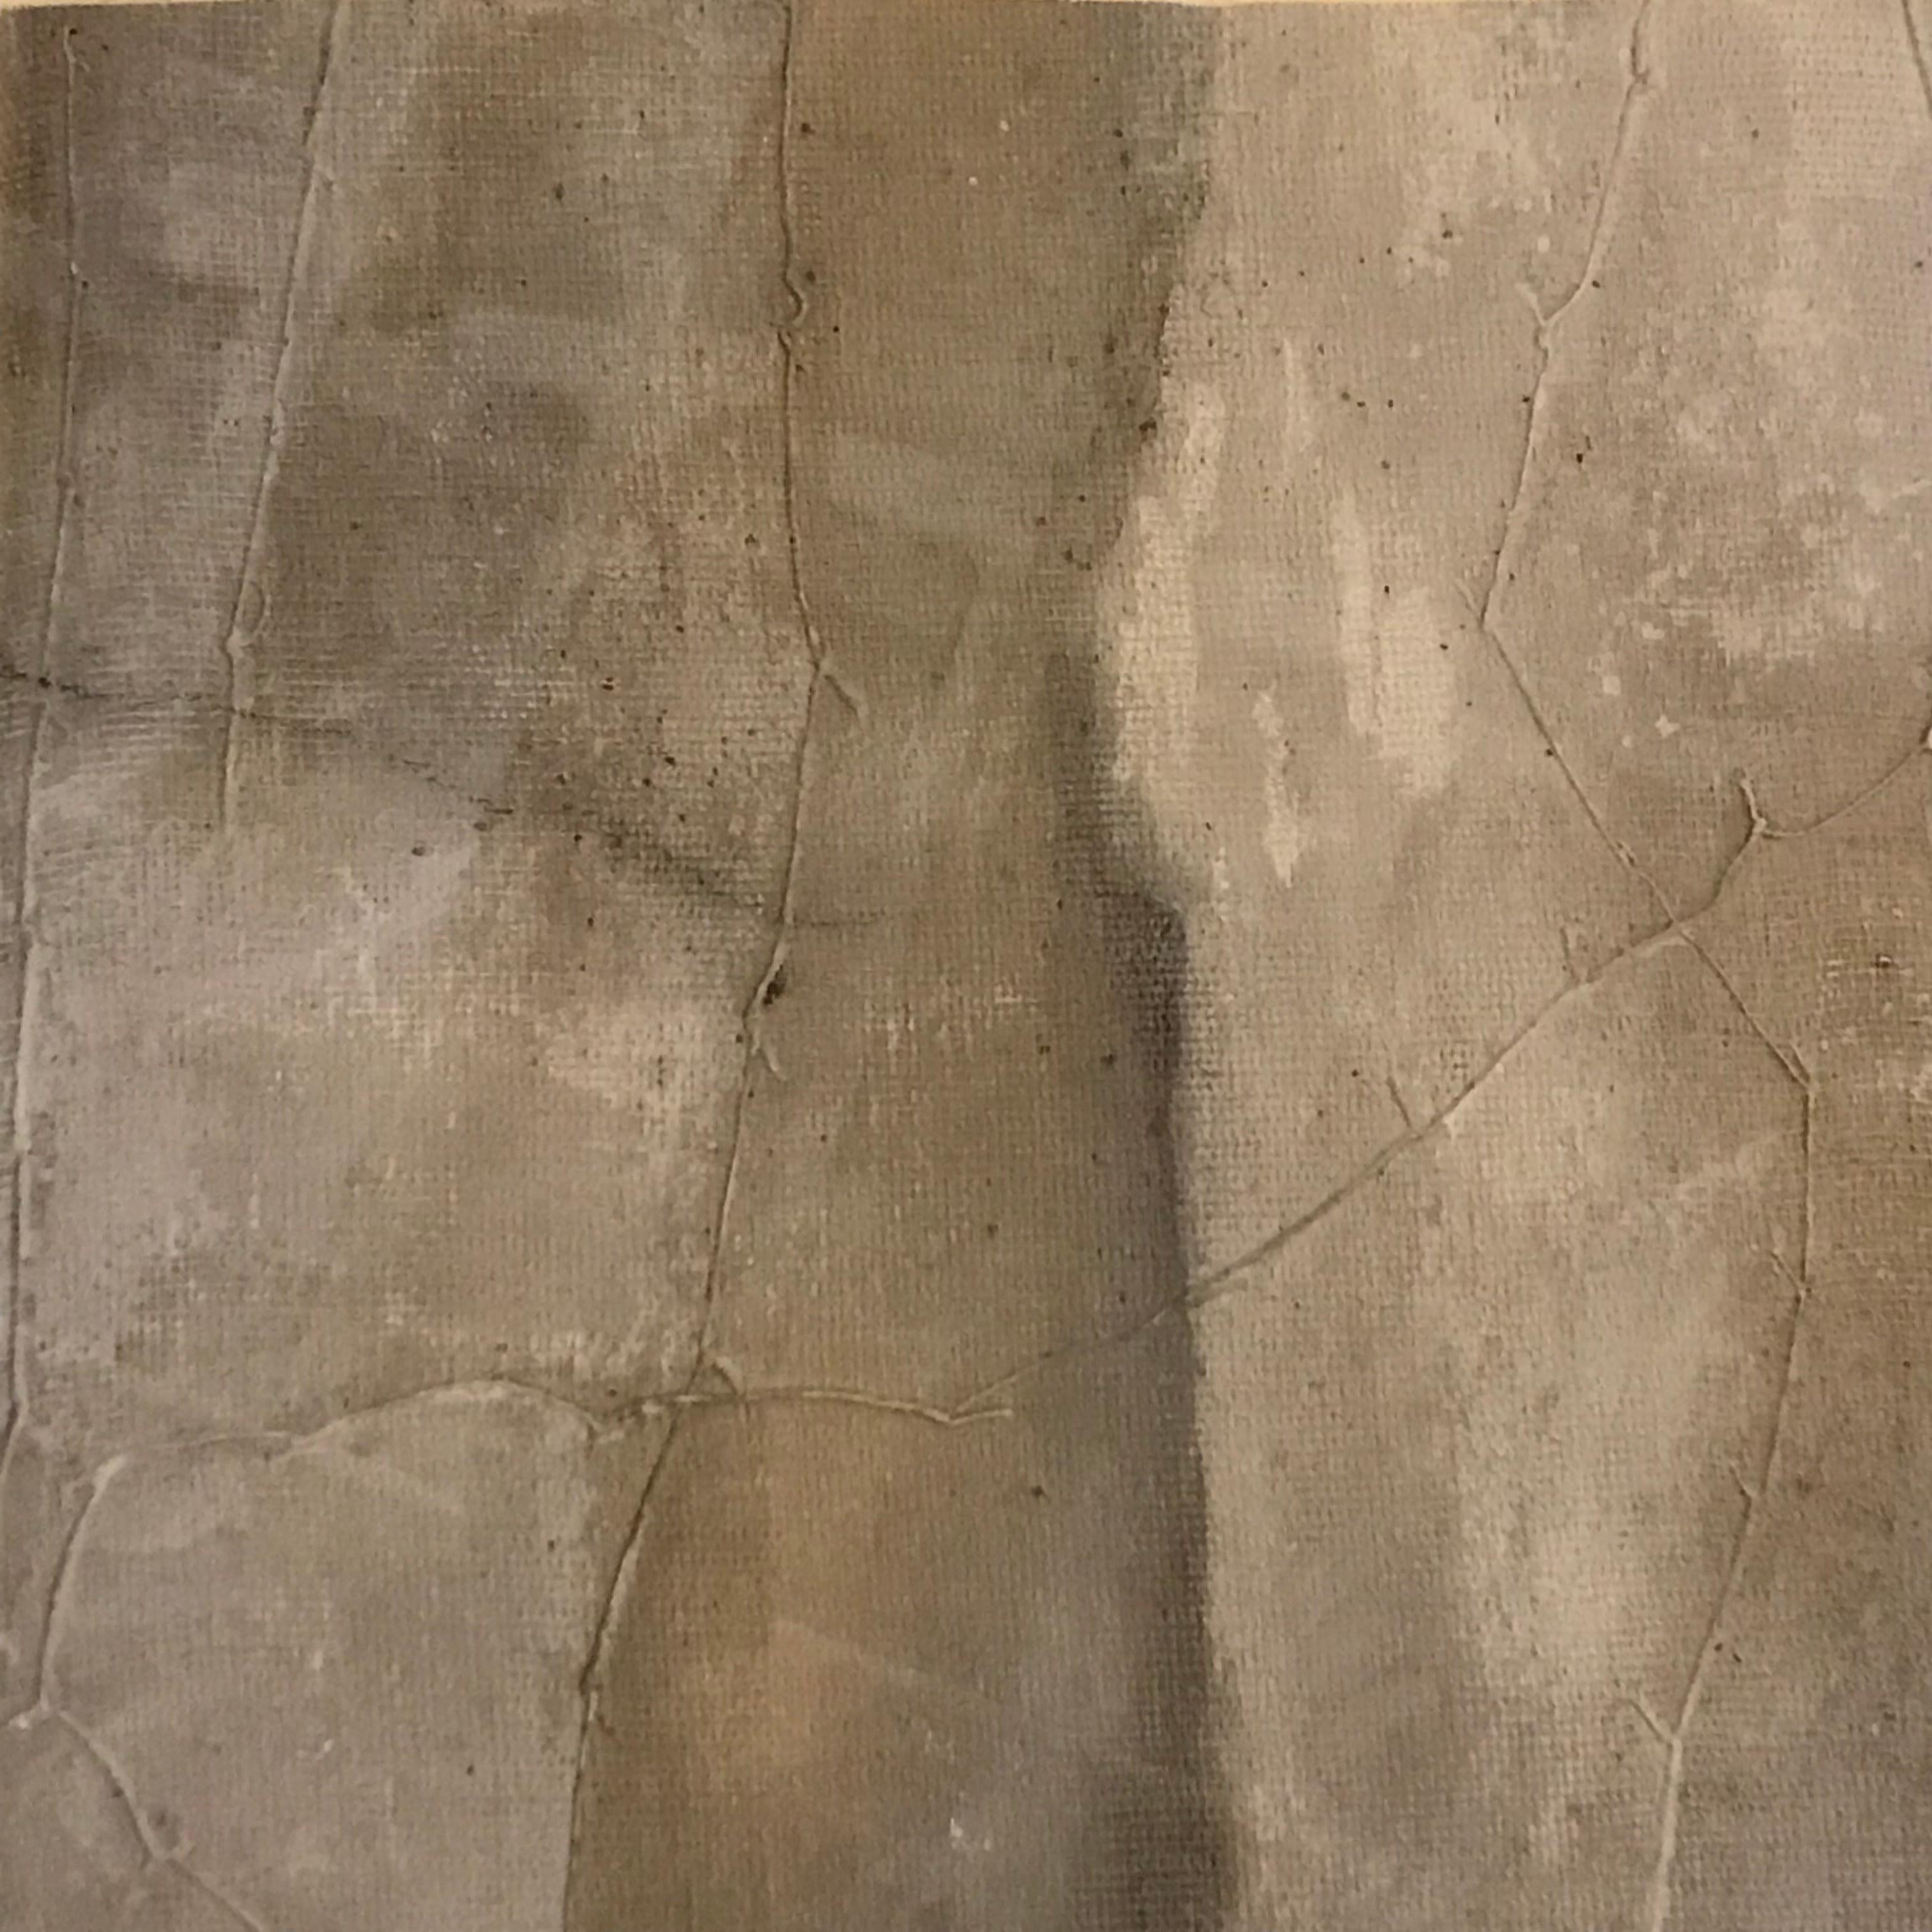 Belgian Shades of Grey Abstract Painting by Diane Petry, Belgium, Contemporary For Sale